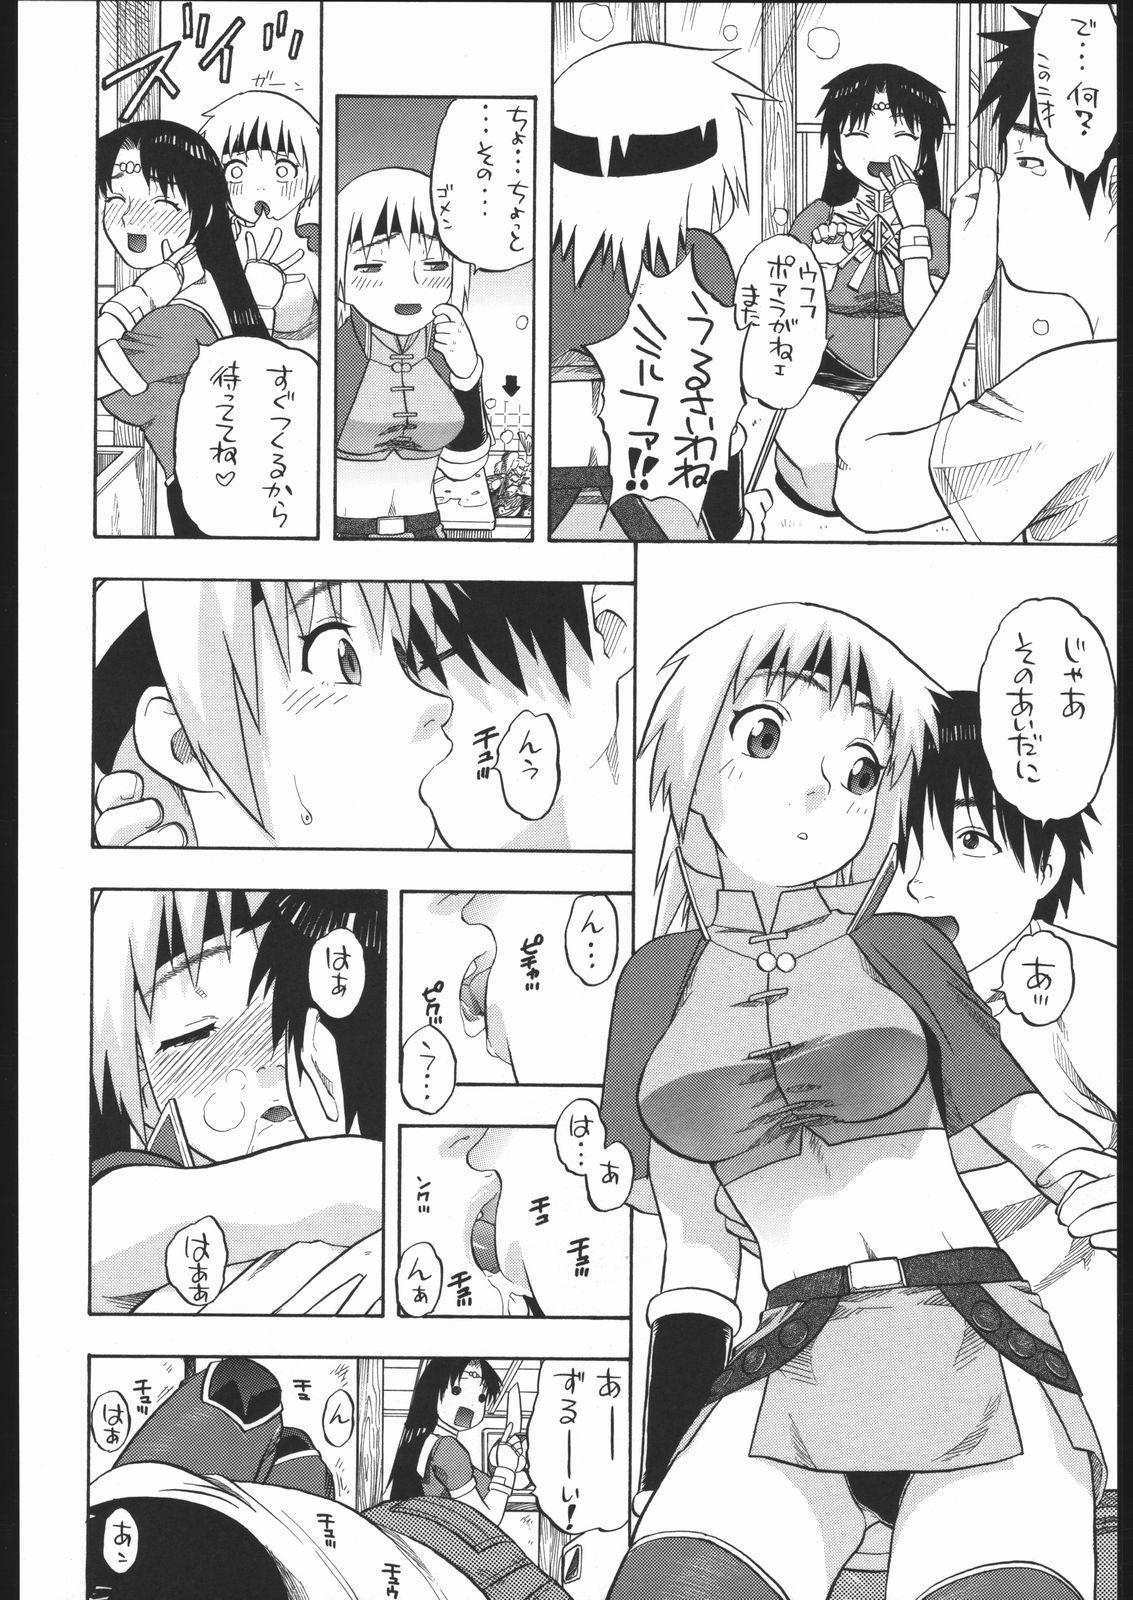 Buceta Milfa to Poala to Yojouhan - Beet the vandel buster Clit - Page 5